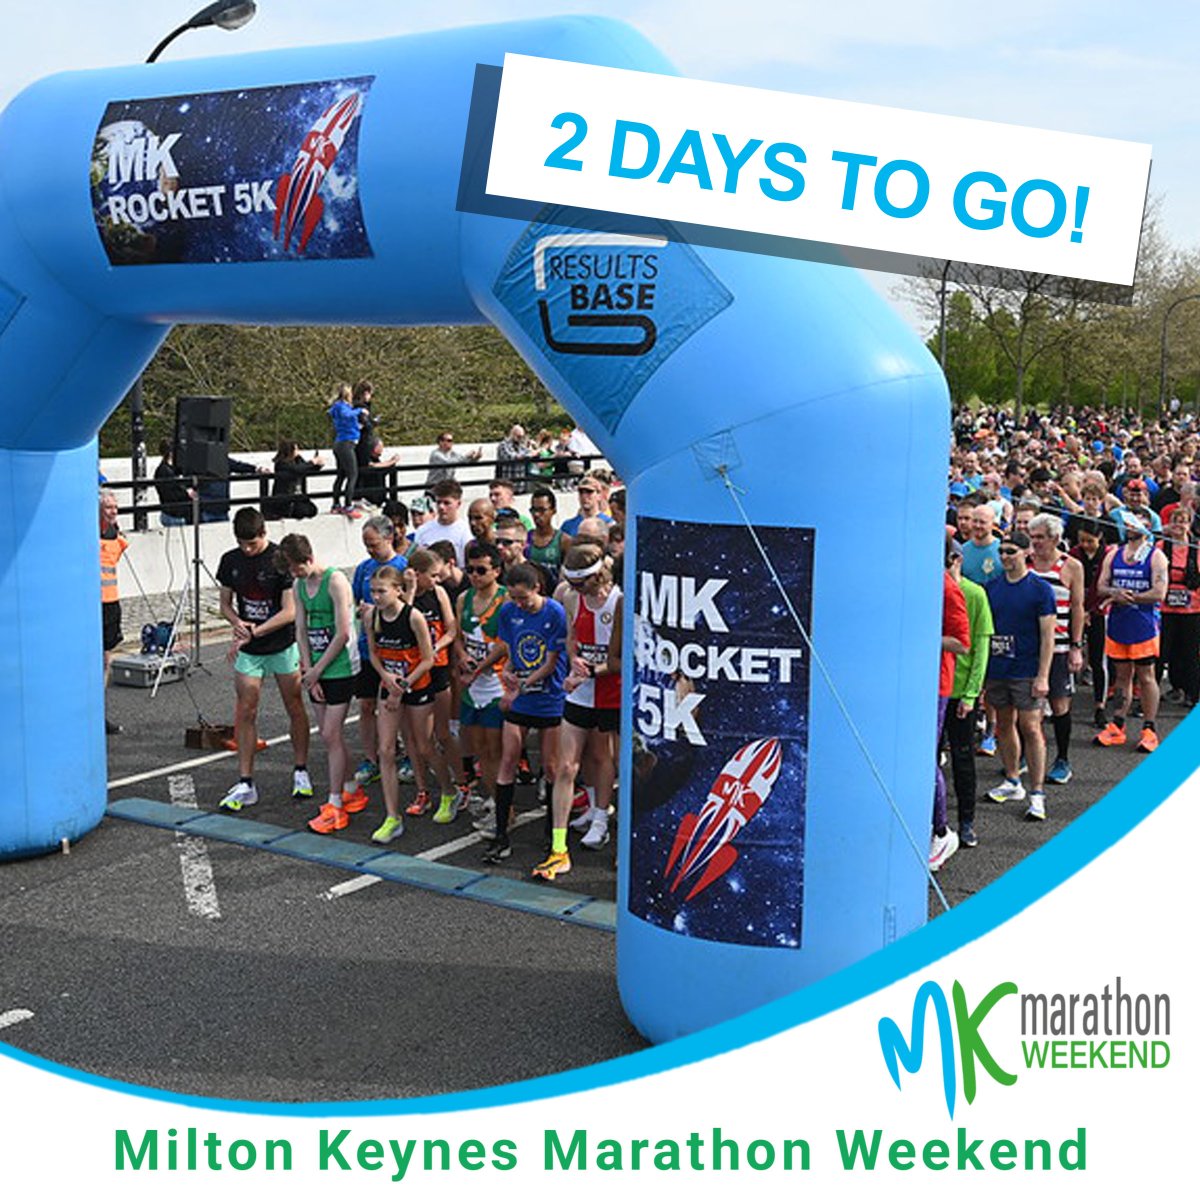 JUST 2 DAYS TO GO UNTIL OUR MAGICAL WEEKEND BEGINS!!✨ Shoot for the stars with our first event, the Rocket 5k run! A fast rocket-fueled 5k with an “out of this world” bling. For more race details, please check our race guides 👇 mkmarathon.com/event-guide/